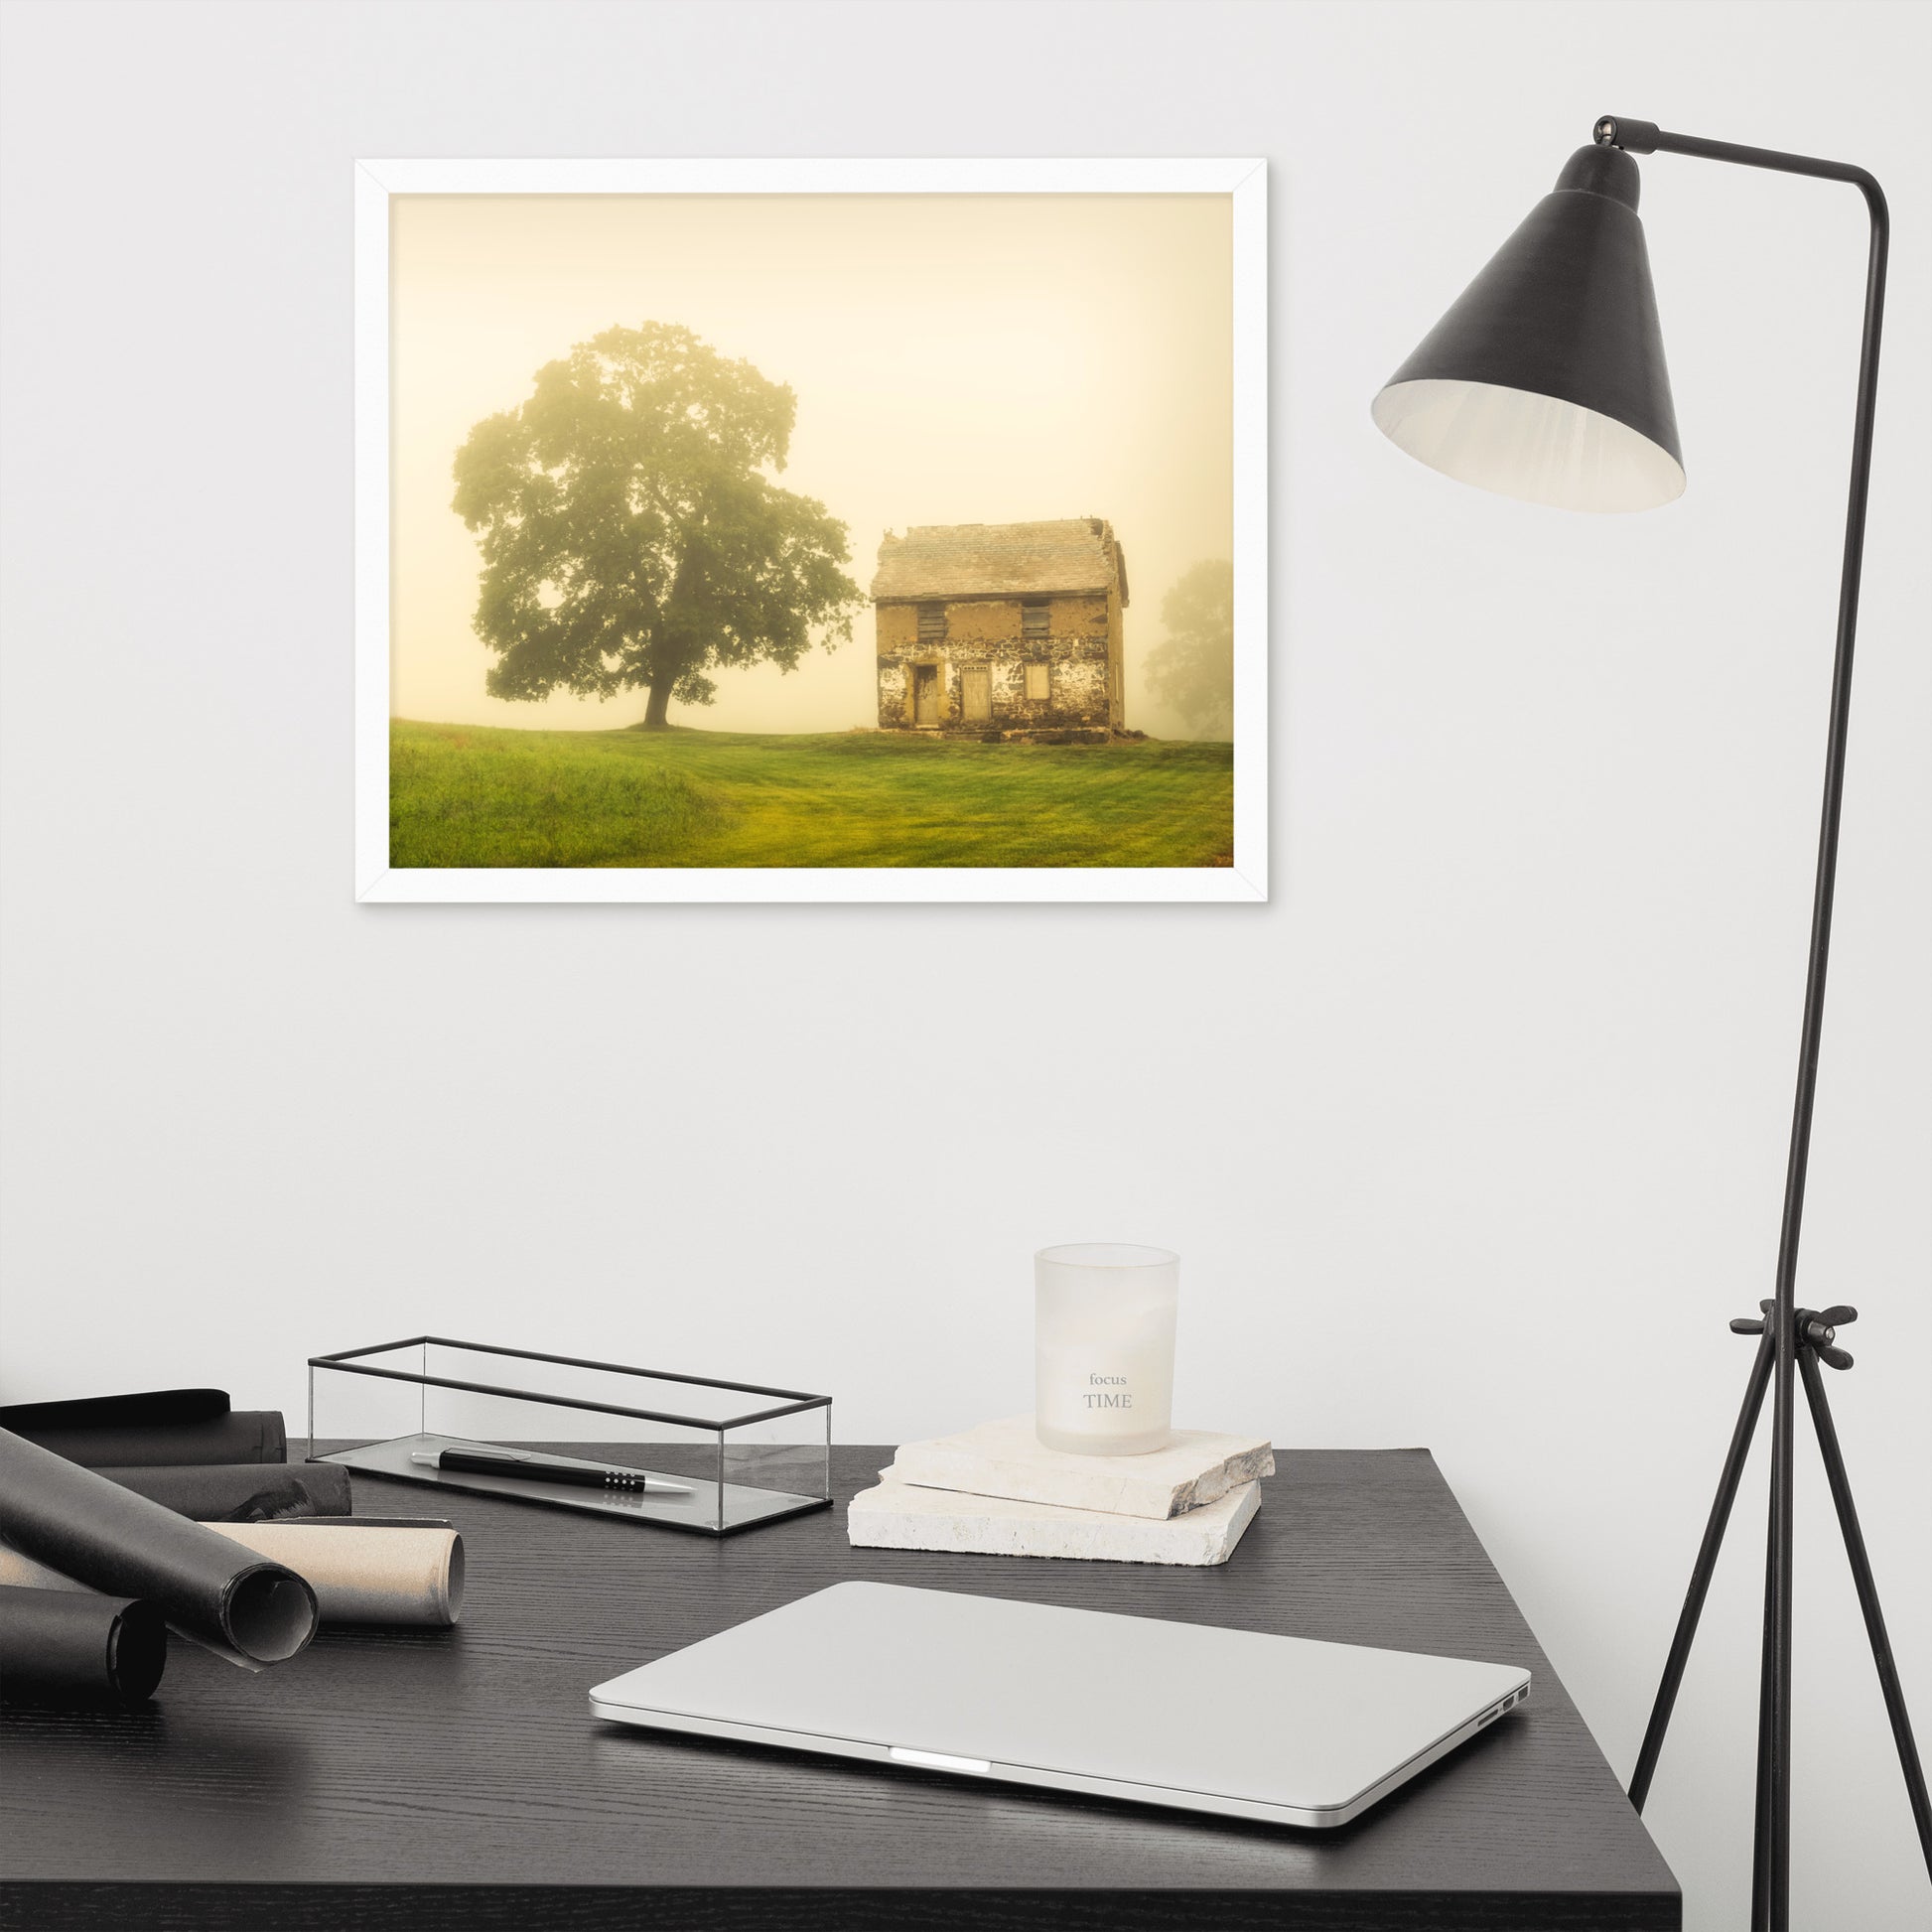 Office Lobby Wall Art: Abandoned House - Rustic / Rural / Country Style Landscape / Nature Framed Photo Paper Wall Art Prints - Artwork - Wall Decor